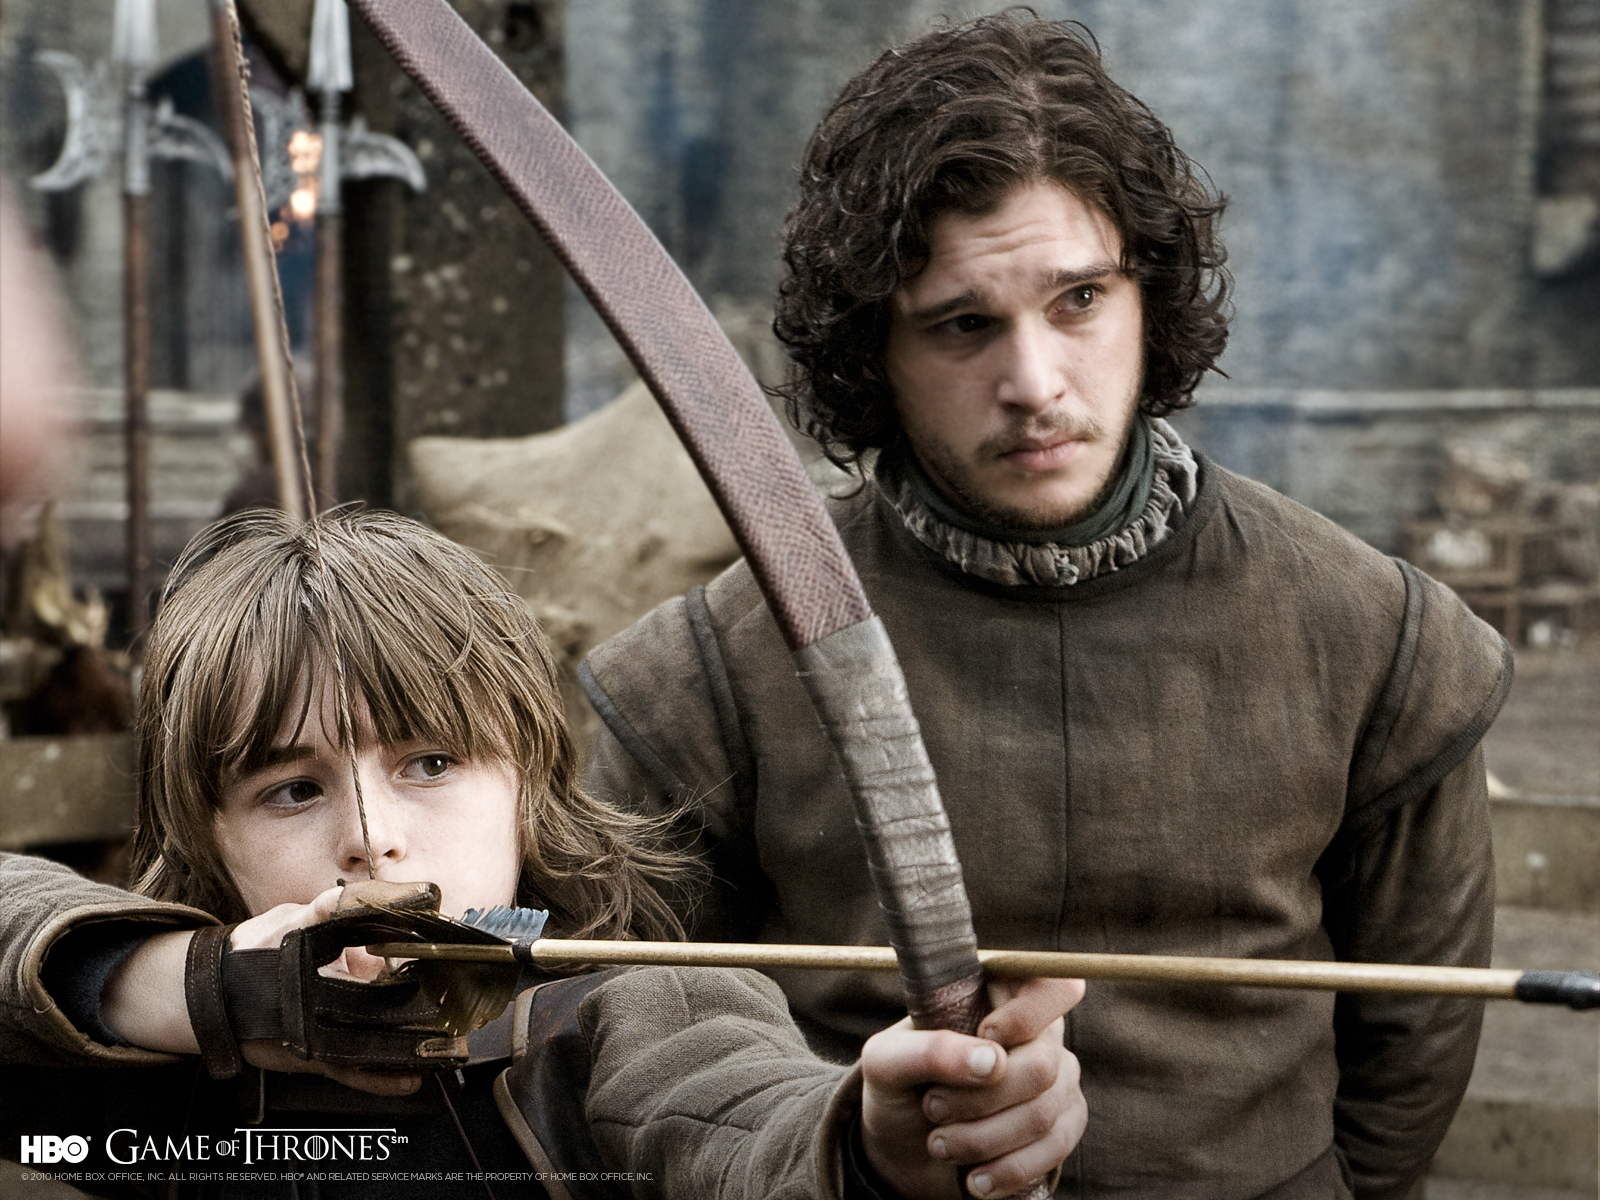 Jon Snow and Bran Stark from Game of Thrones in a dramatic scene.